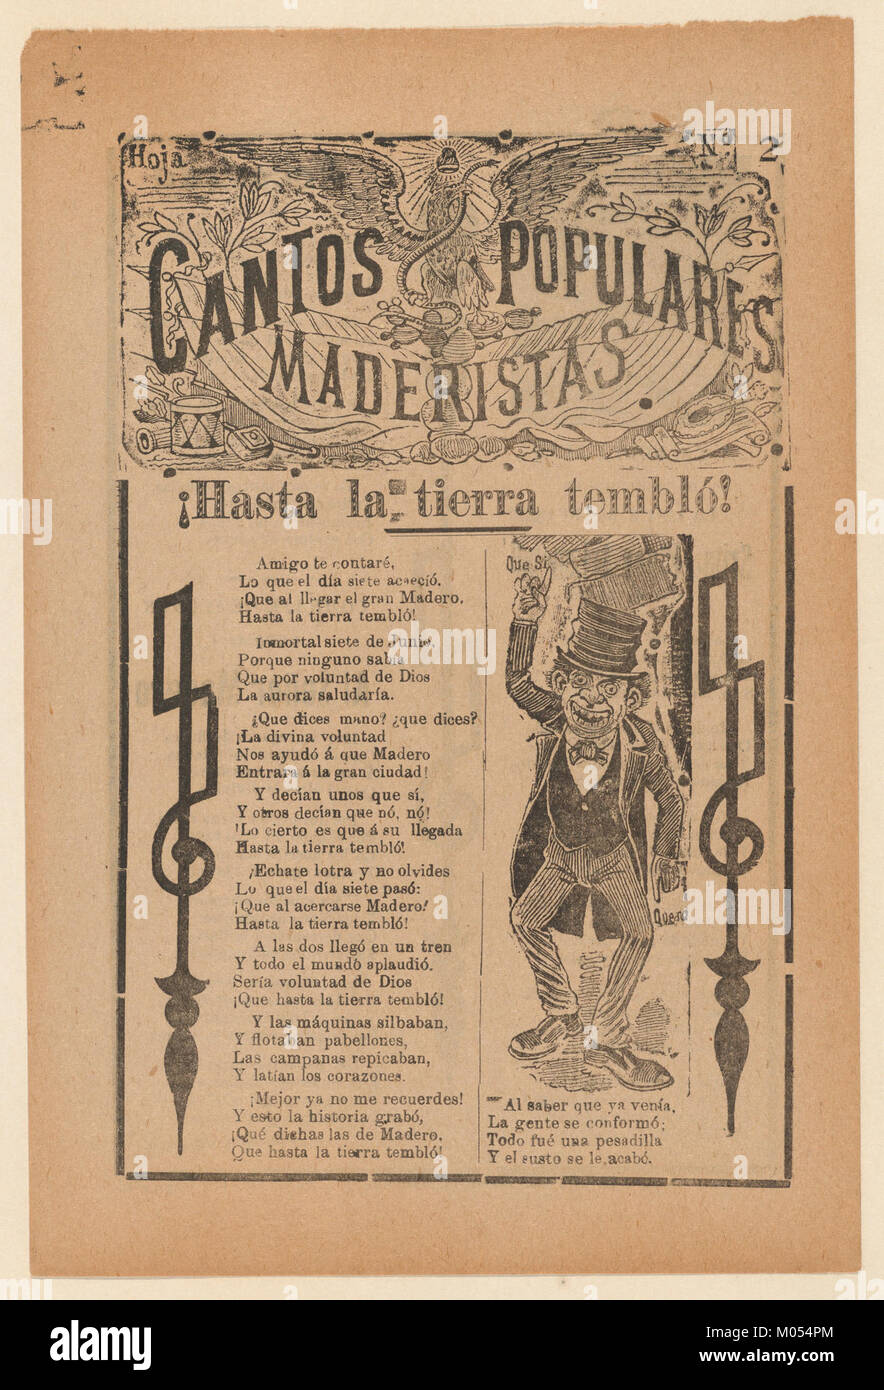 Broadsheet celebrating one of the founders of the Mexican Revolution, Francisco Madero, shown in a suit and top hat pointing to the phrases 'Que Si' and 'Que No' MET DP868526 Stock Photo